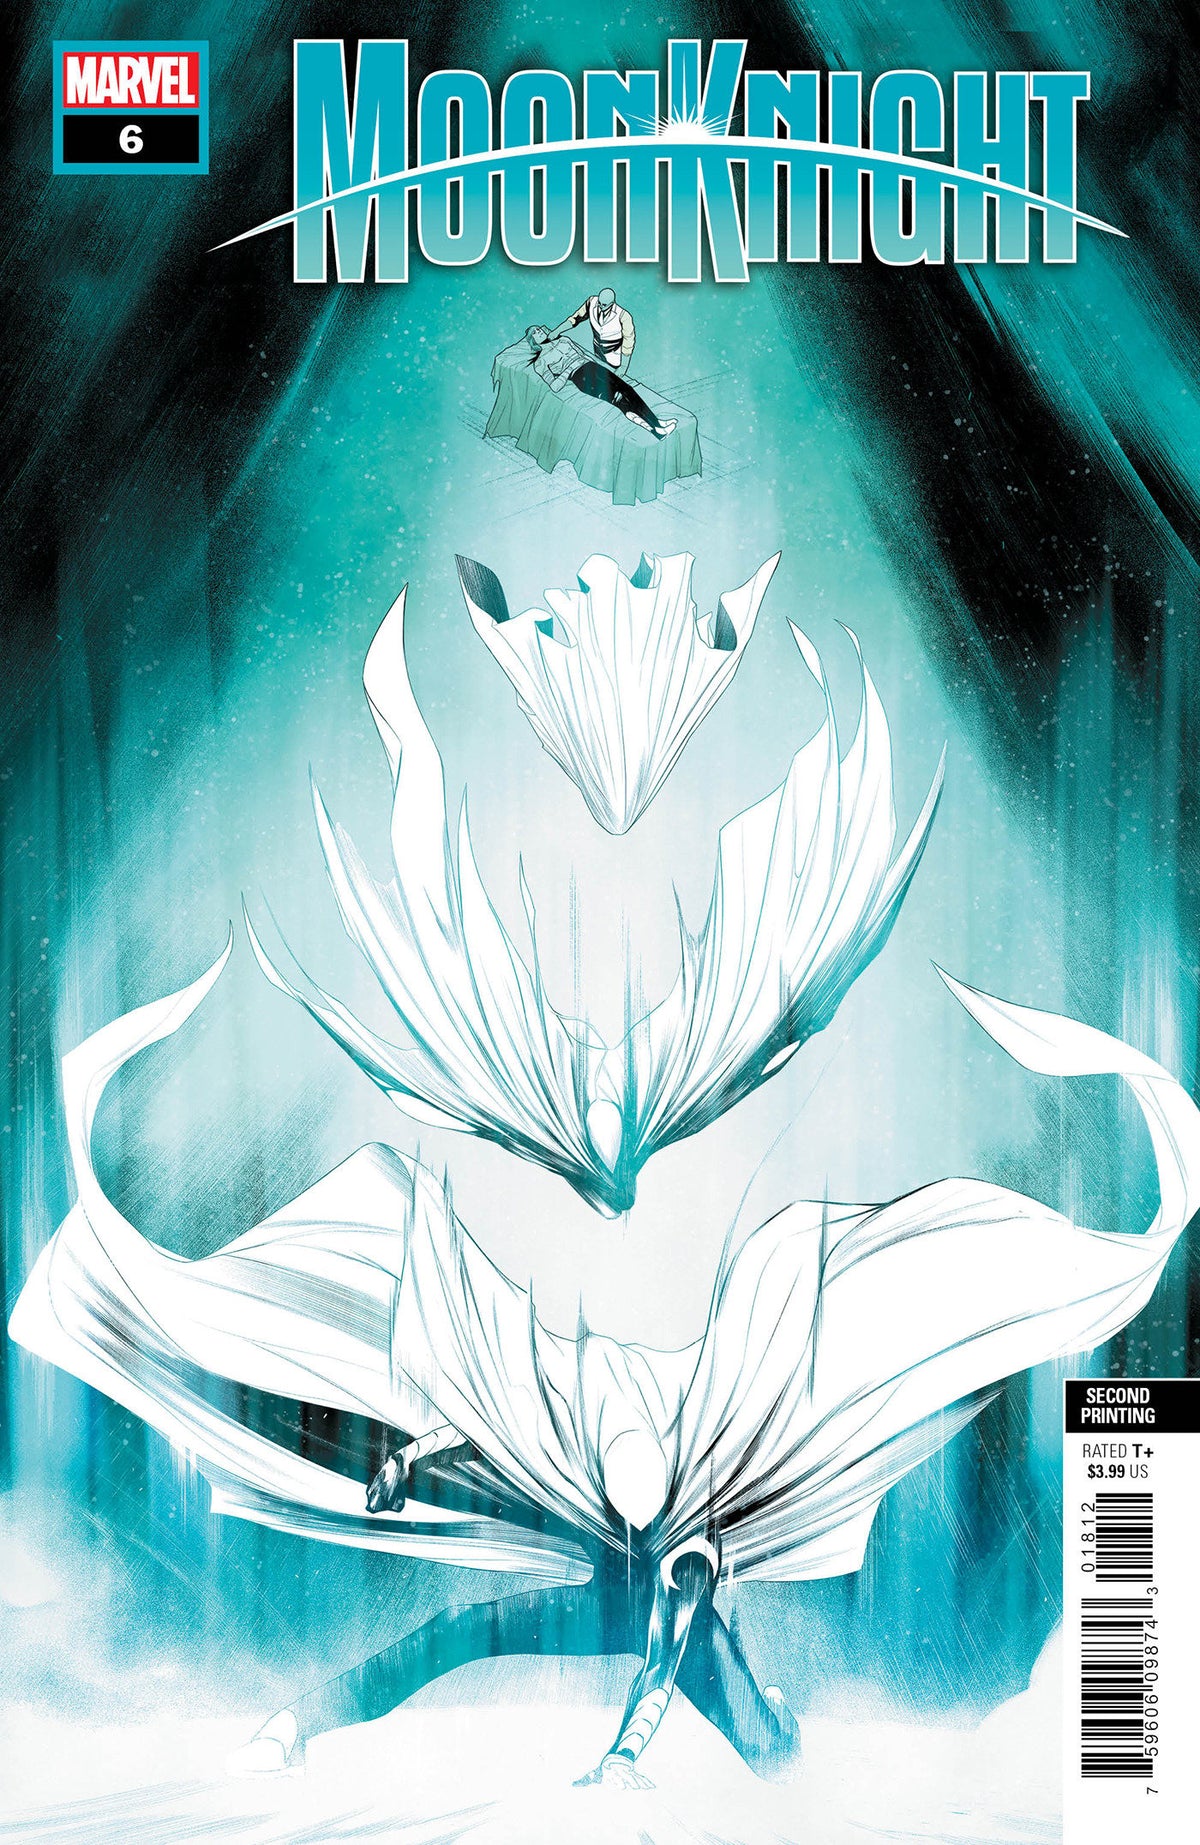 Image of Moon Knight 6 Cappuccio 2nd Printing Variant comic sold by Stronghold Collectibles.